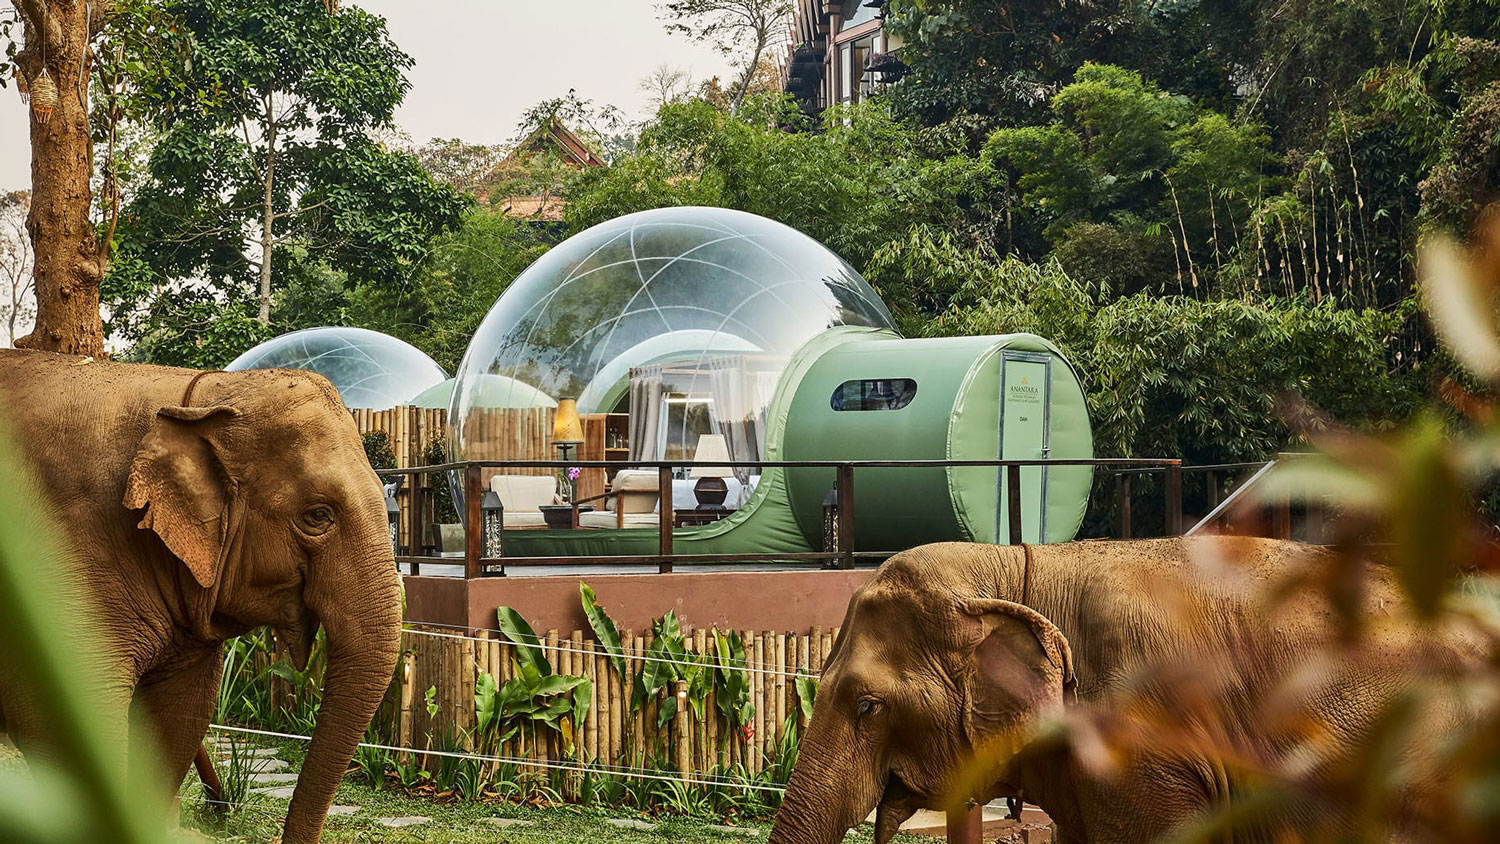 Sleep With Elephants Under the Stars in a ‘Jungle Bubble’ in Thailand